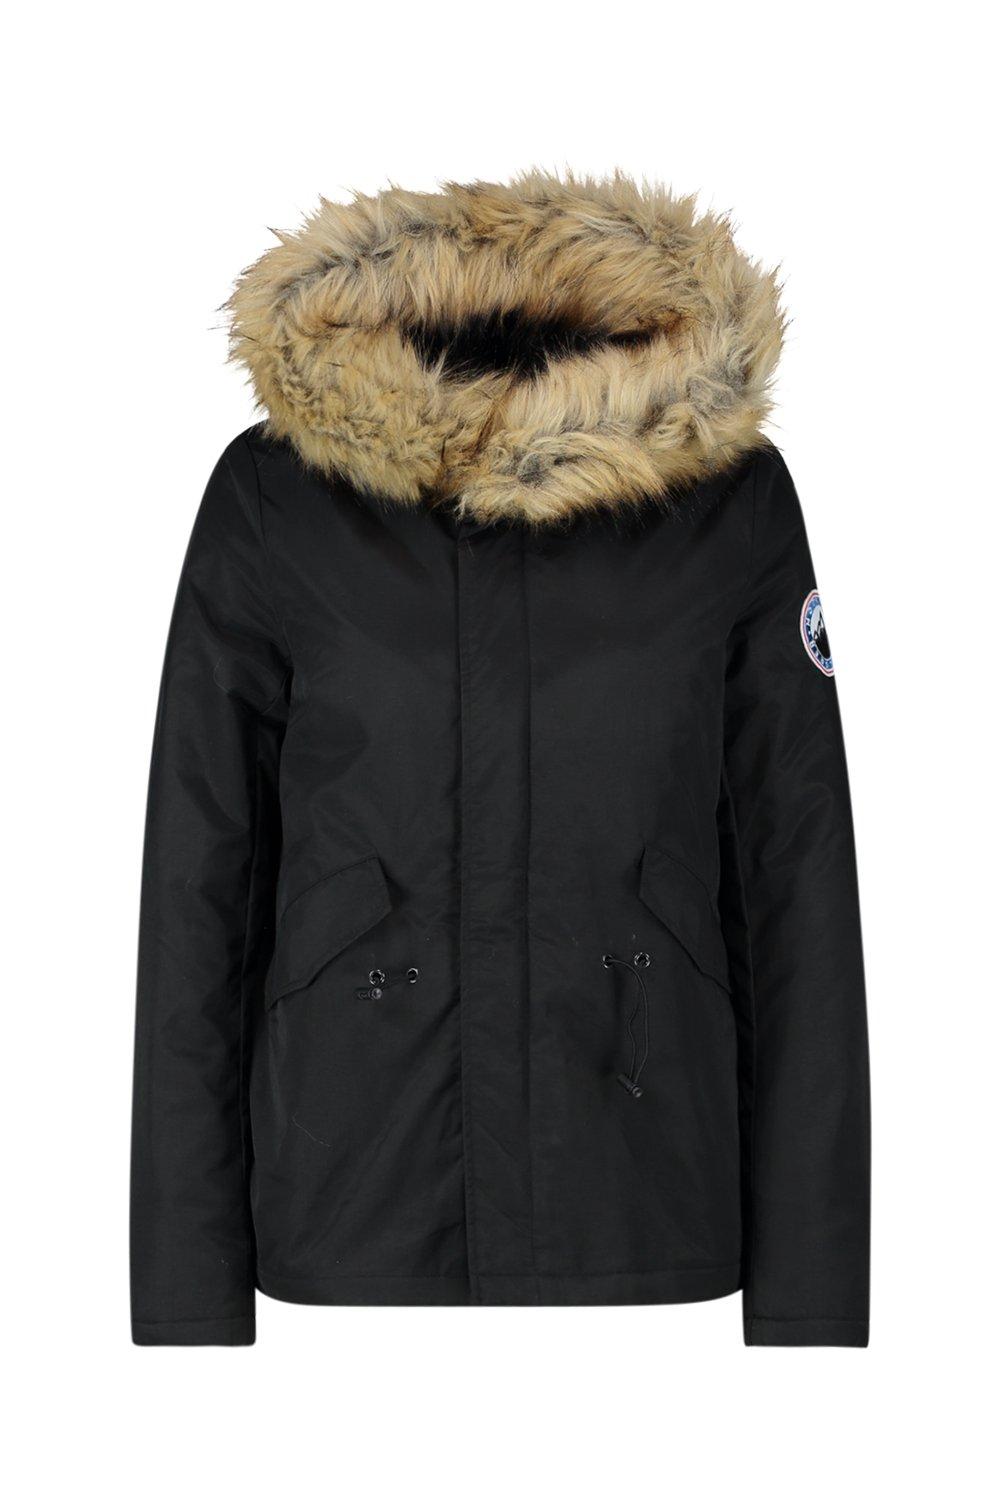 Boohoo Luxe Faux Fur Sporty Parka Coat in Black Womens Clothing Jackets Padded and down jackets 